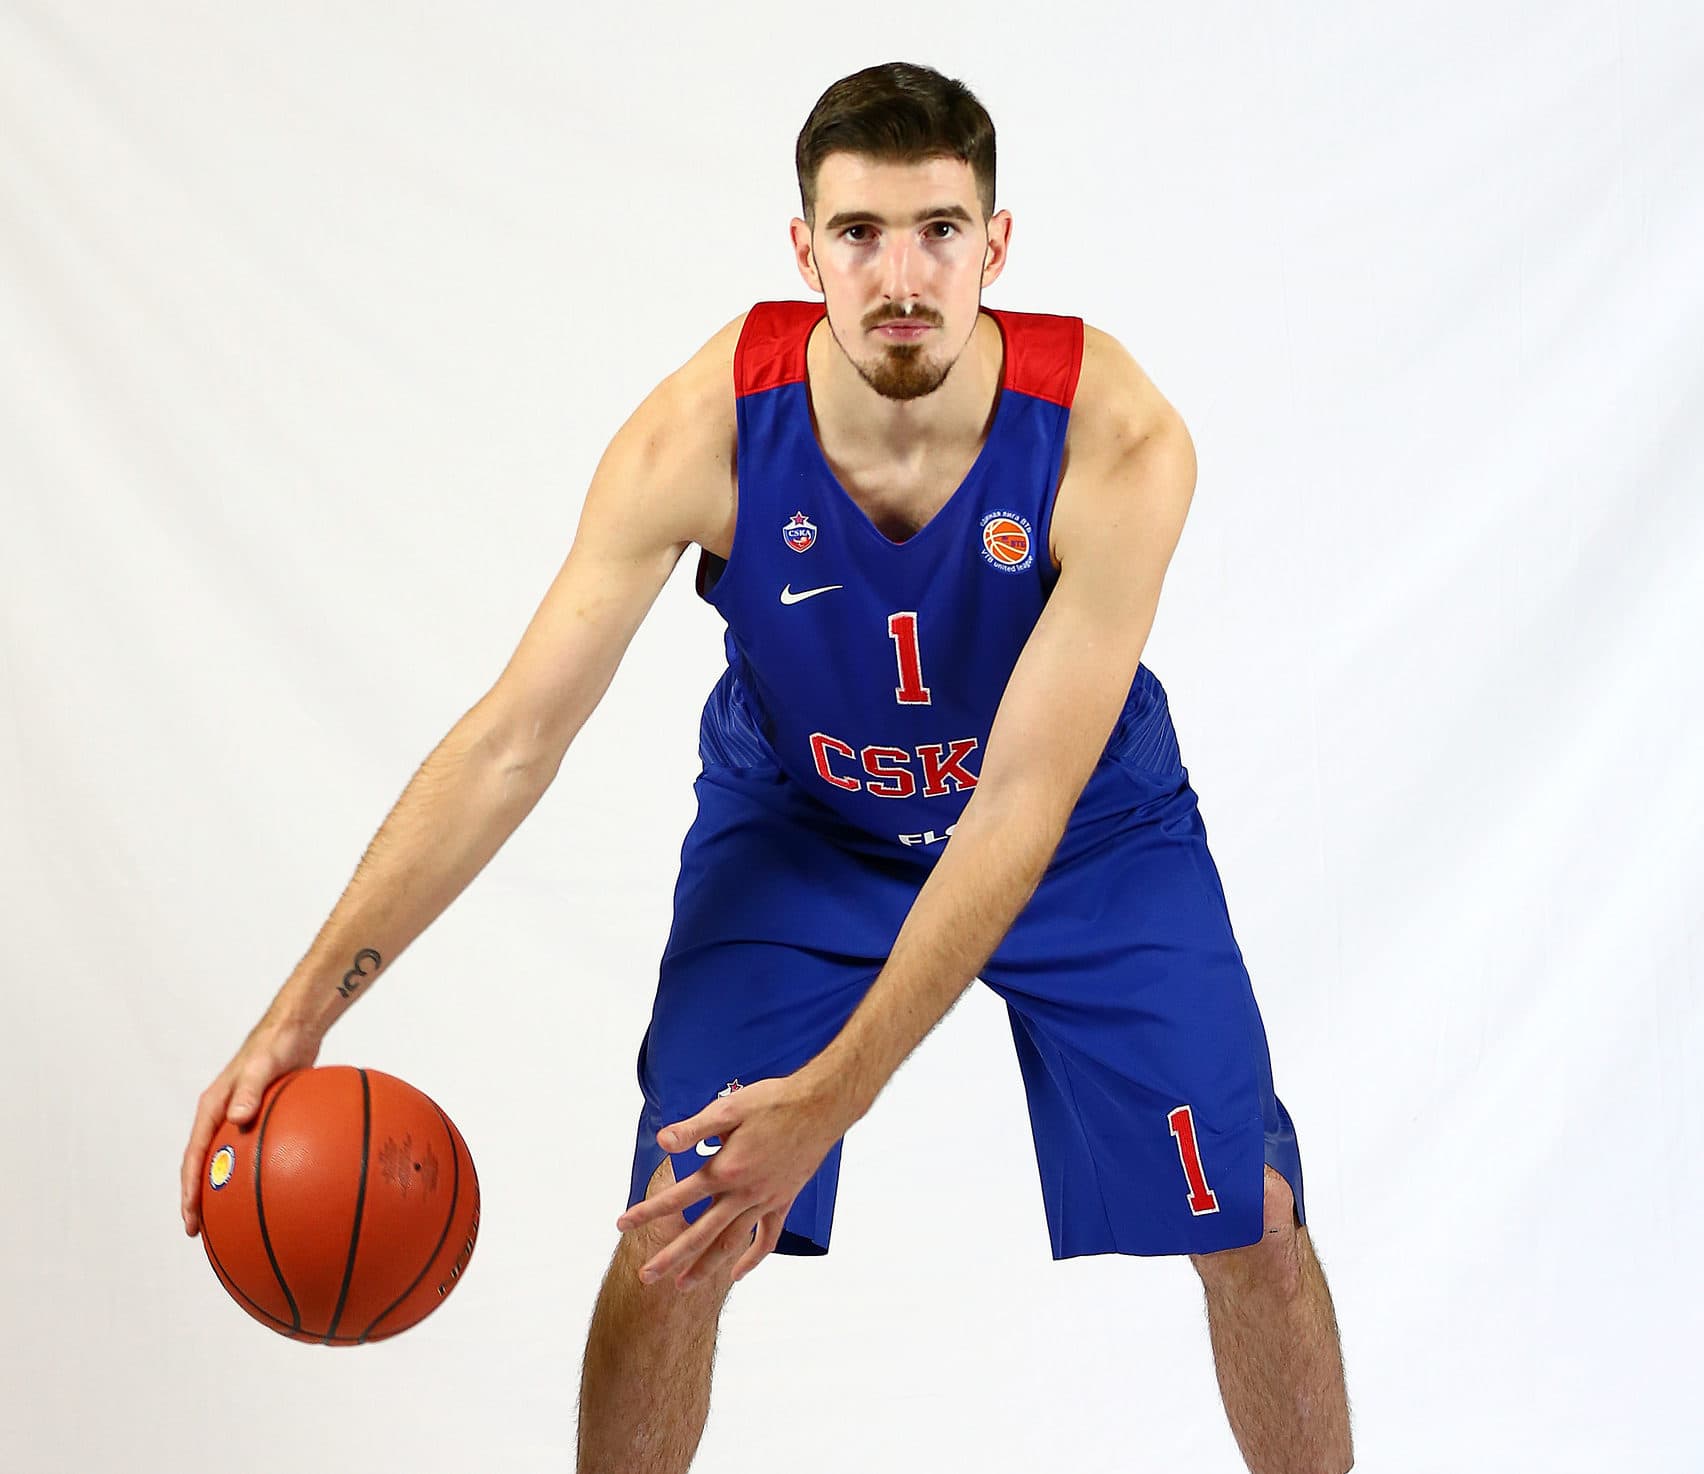 Fantasy: De Colo Is Going To Make A Dynamic Return